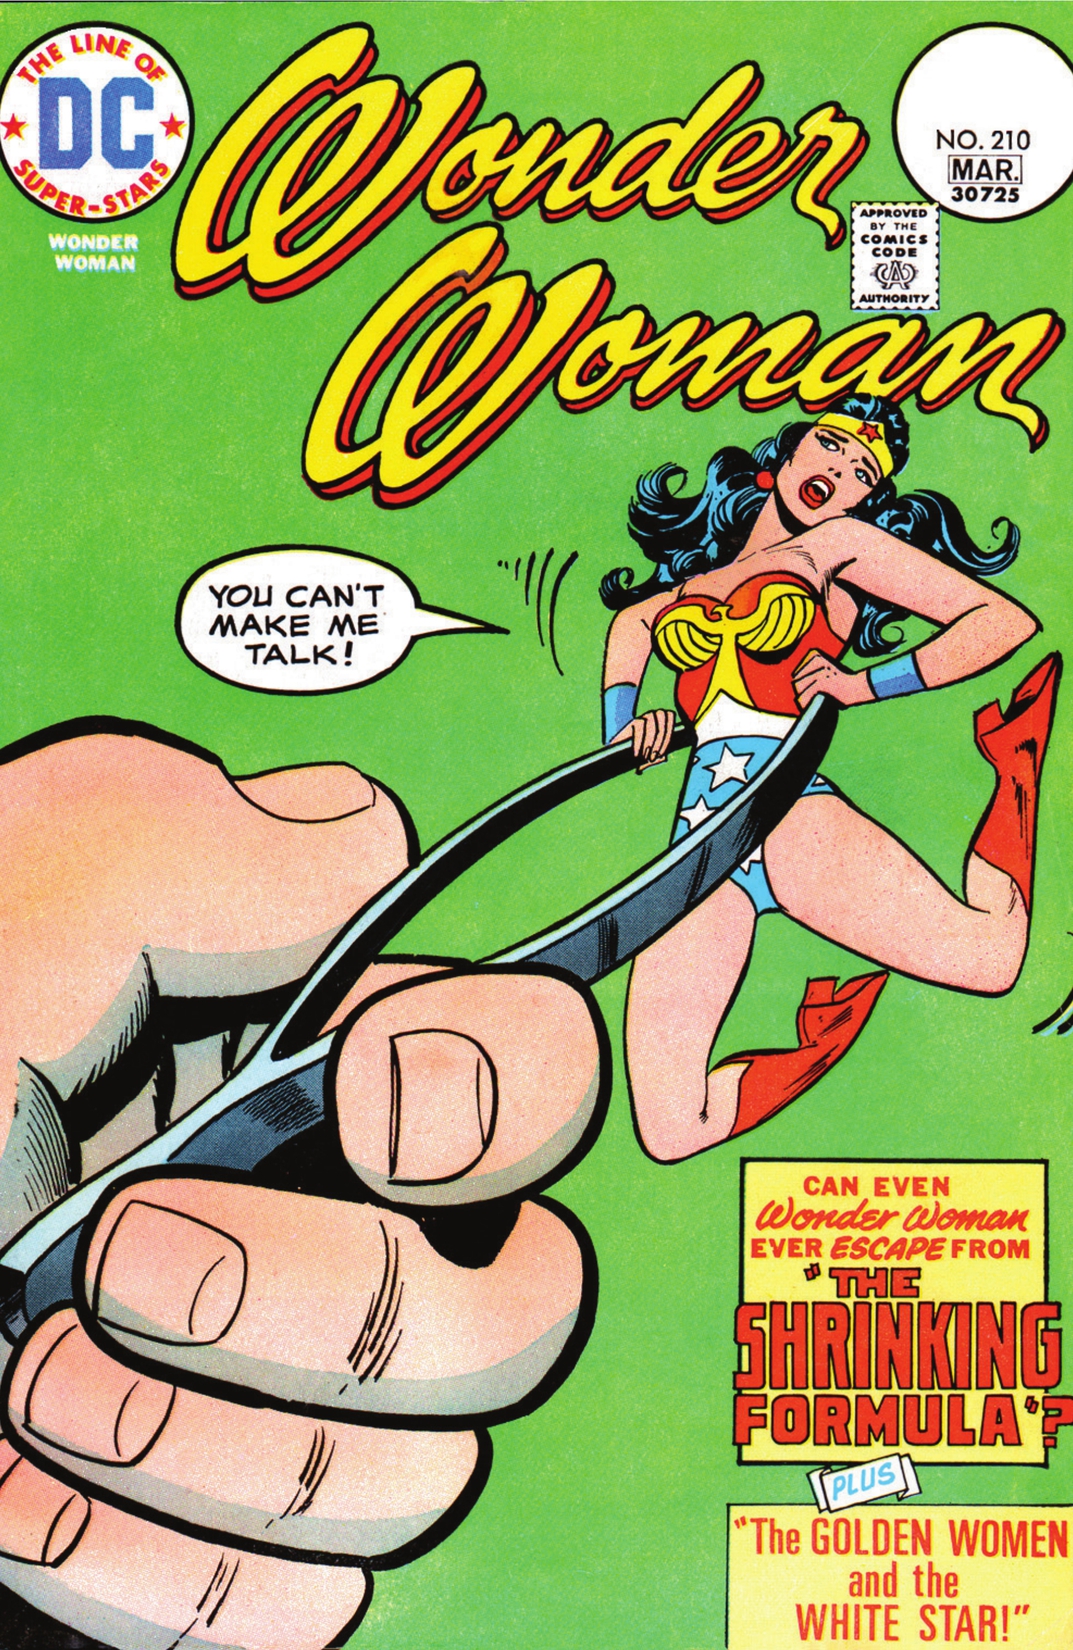 Wonder Woman (1942-1986) #210 preview images